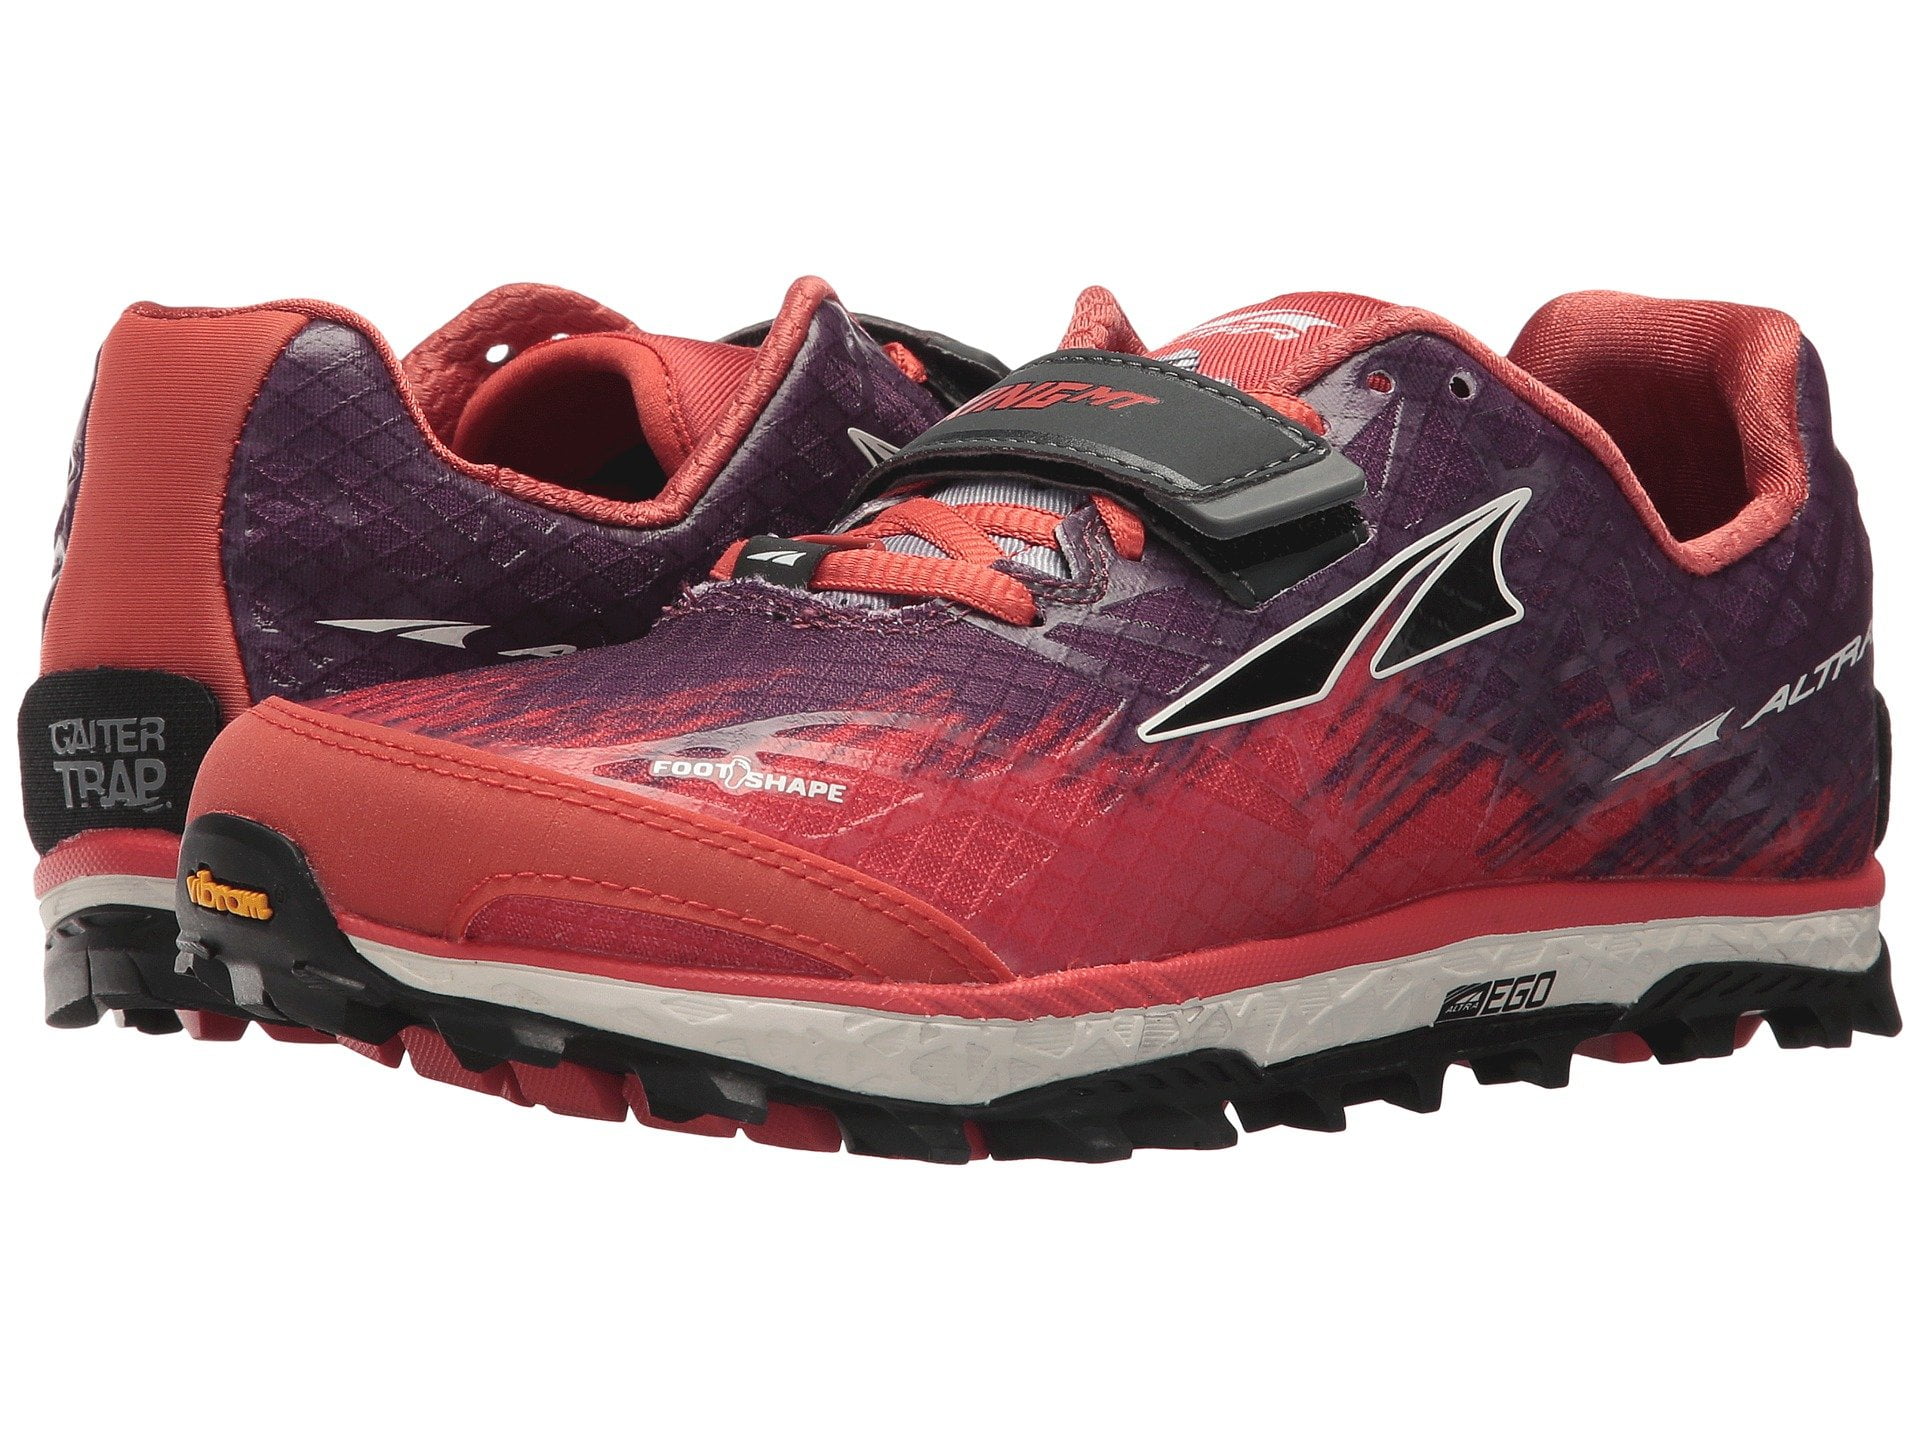 0 drop trail running shoes